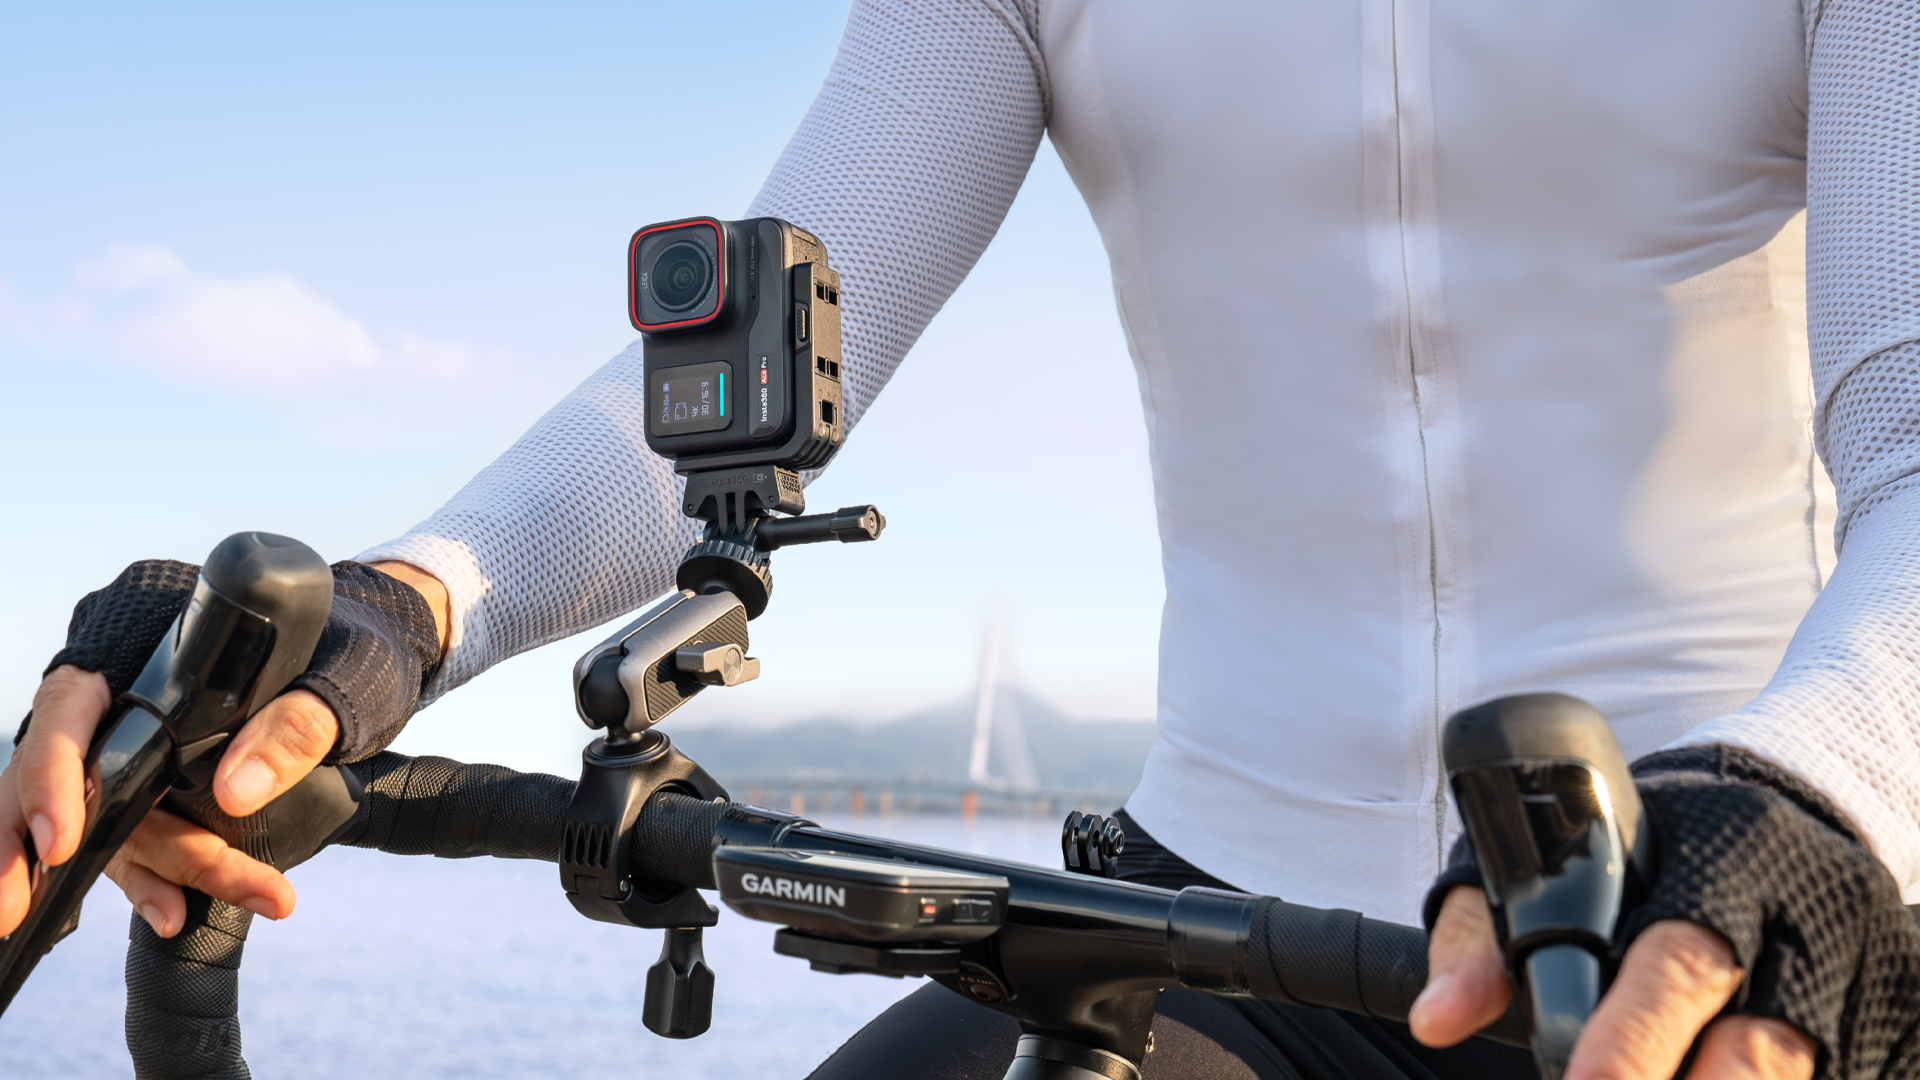 The new Insta360 Ace Pro camera with smart AI-Powered tracking!